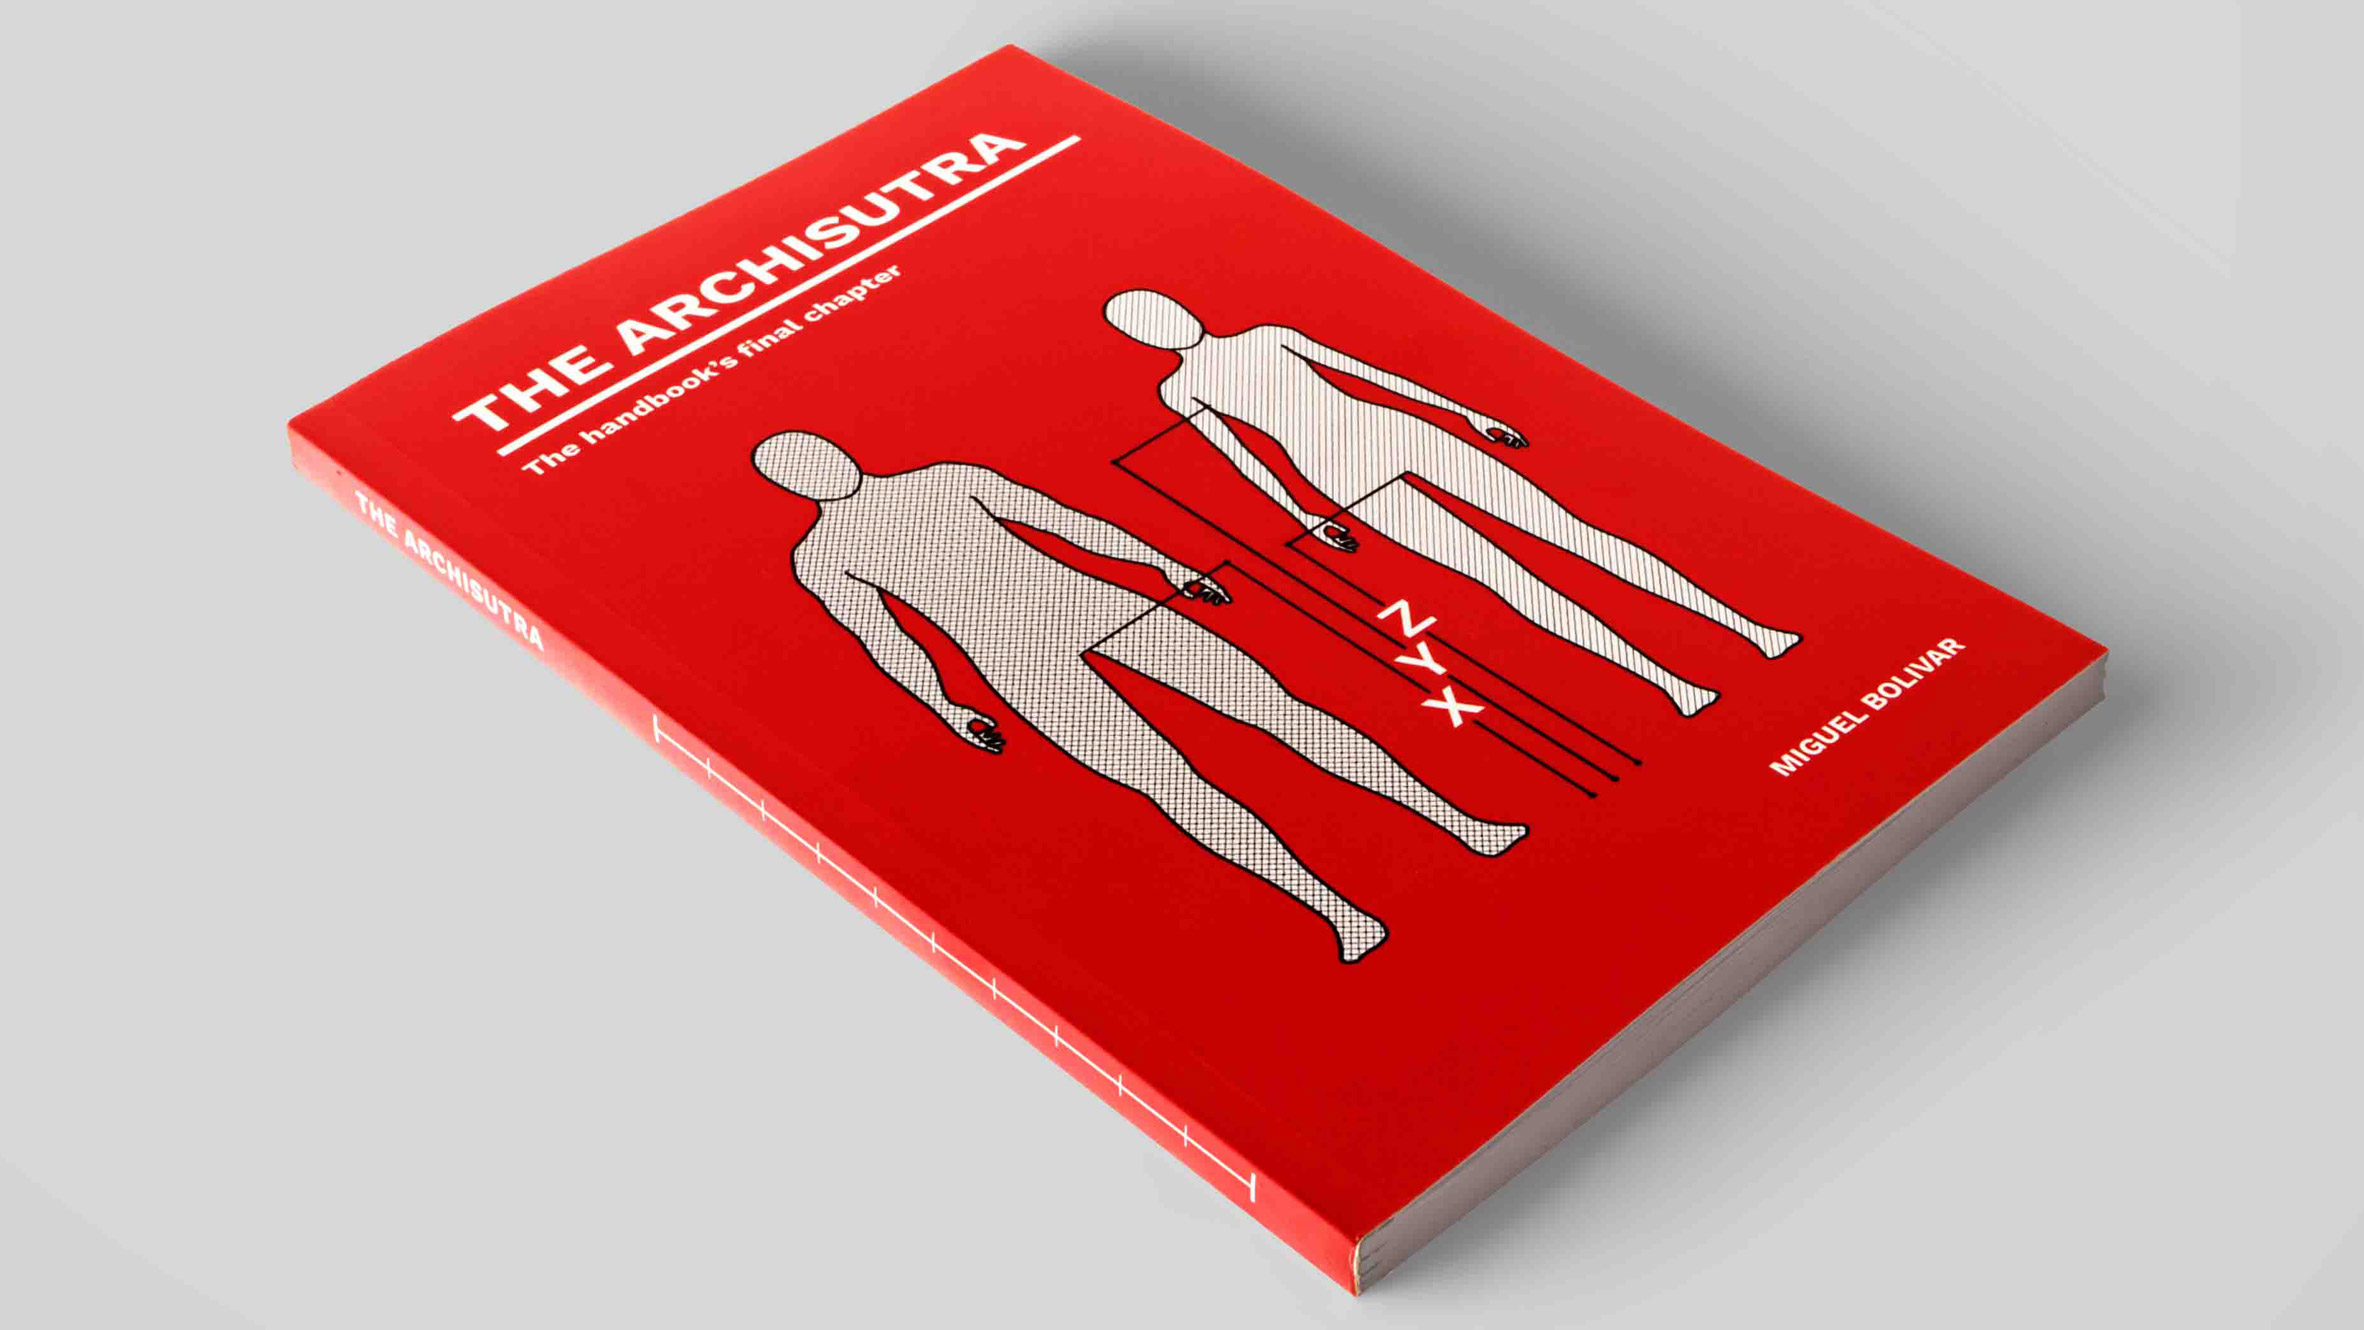 Archisutra manual teaches architecture and design-inspired sex positions